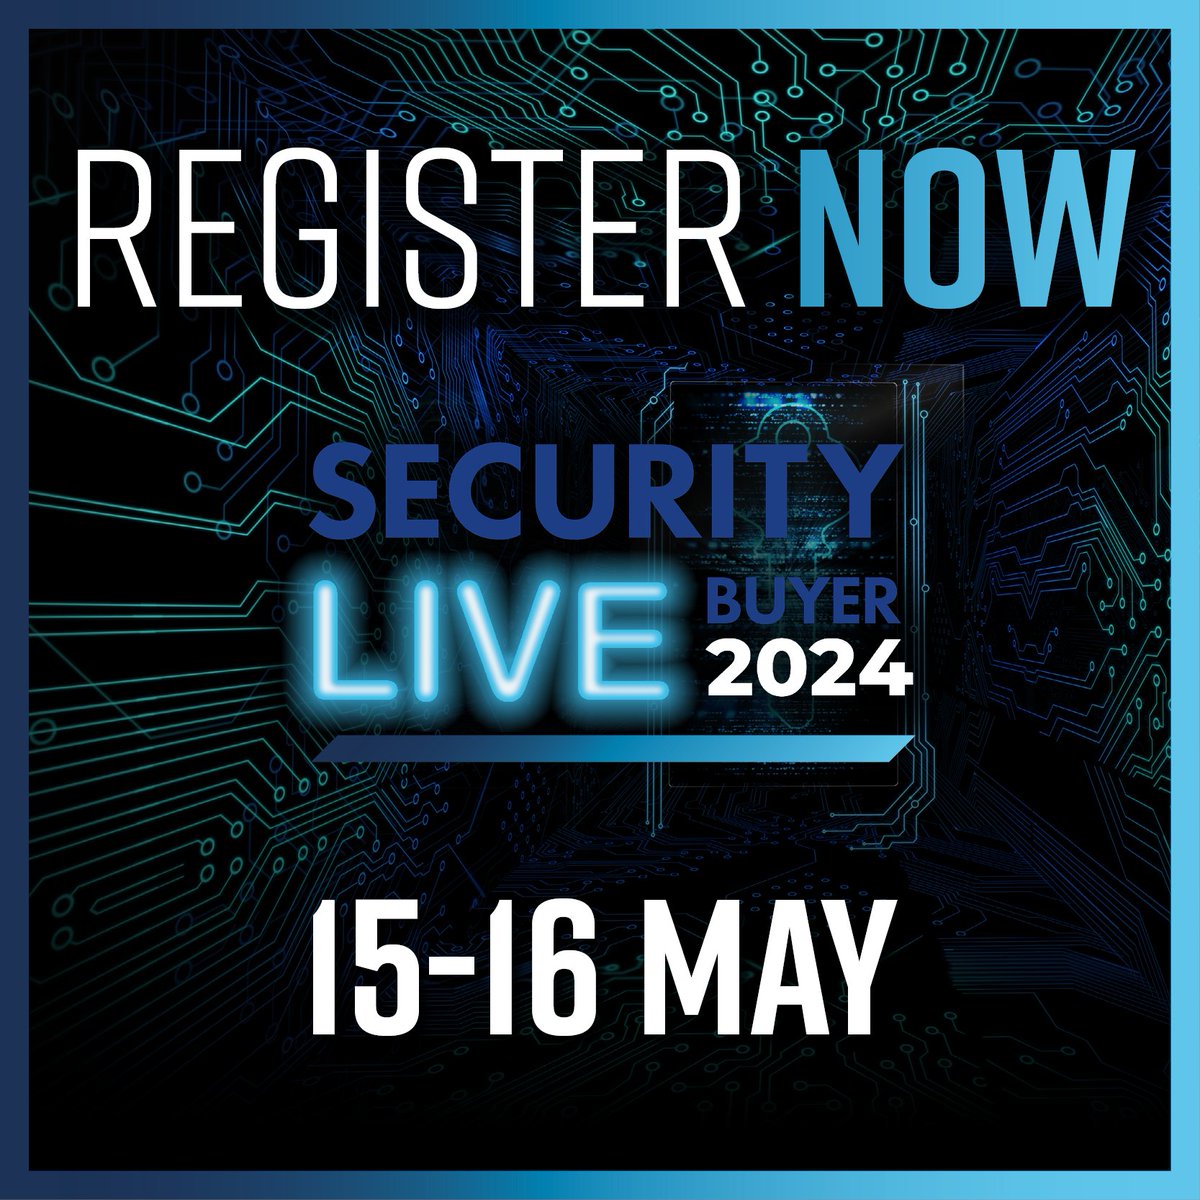 Join SBD National Manager Michelle Kradolfer at @SecurityBuyer Live, taking place 15-16 May. Don’t miss her session on Securing IoT Connected Products taking place on Wednesday, May 15, at 15:30hrs. Register for free here: events.hand-media.com/login/event/fi… #Security #Technology